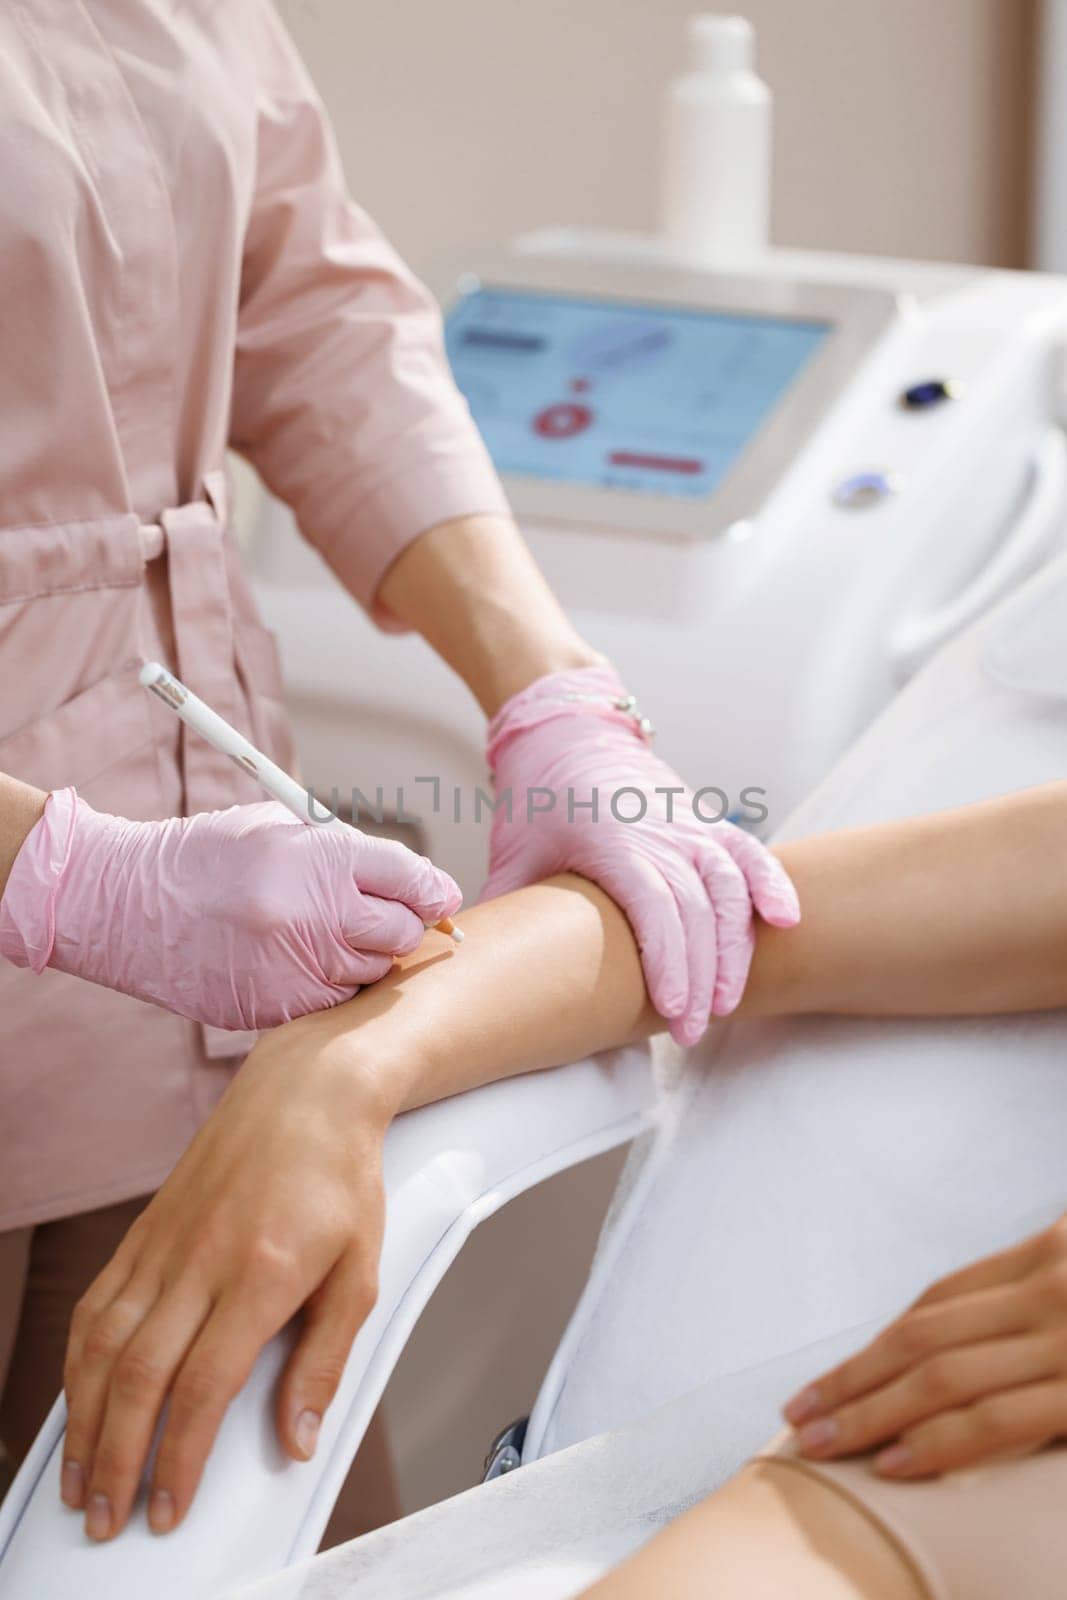 Laser hair removal specialist draws on moles on the woman's hand with a protective pencil. Women's hands in gloves mark the area for epilation and protection of moles with a pencil by uflypro